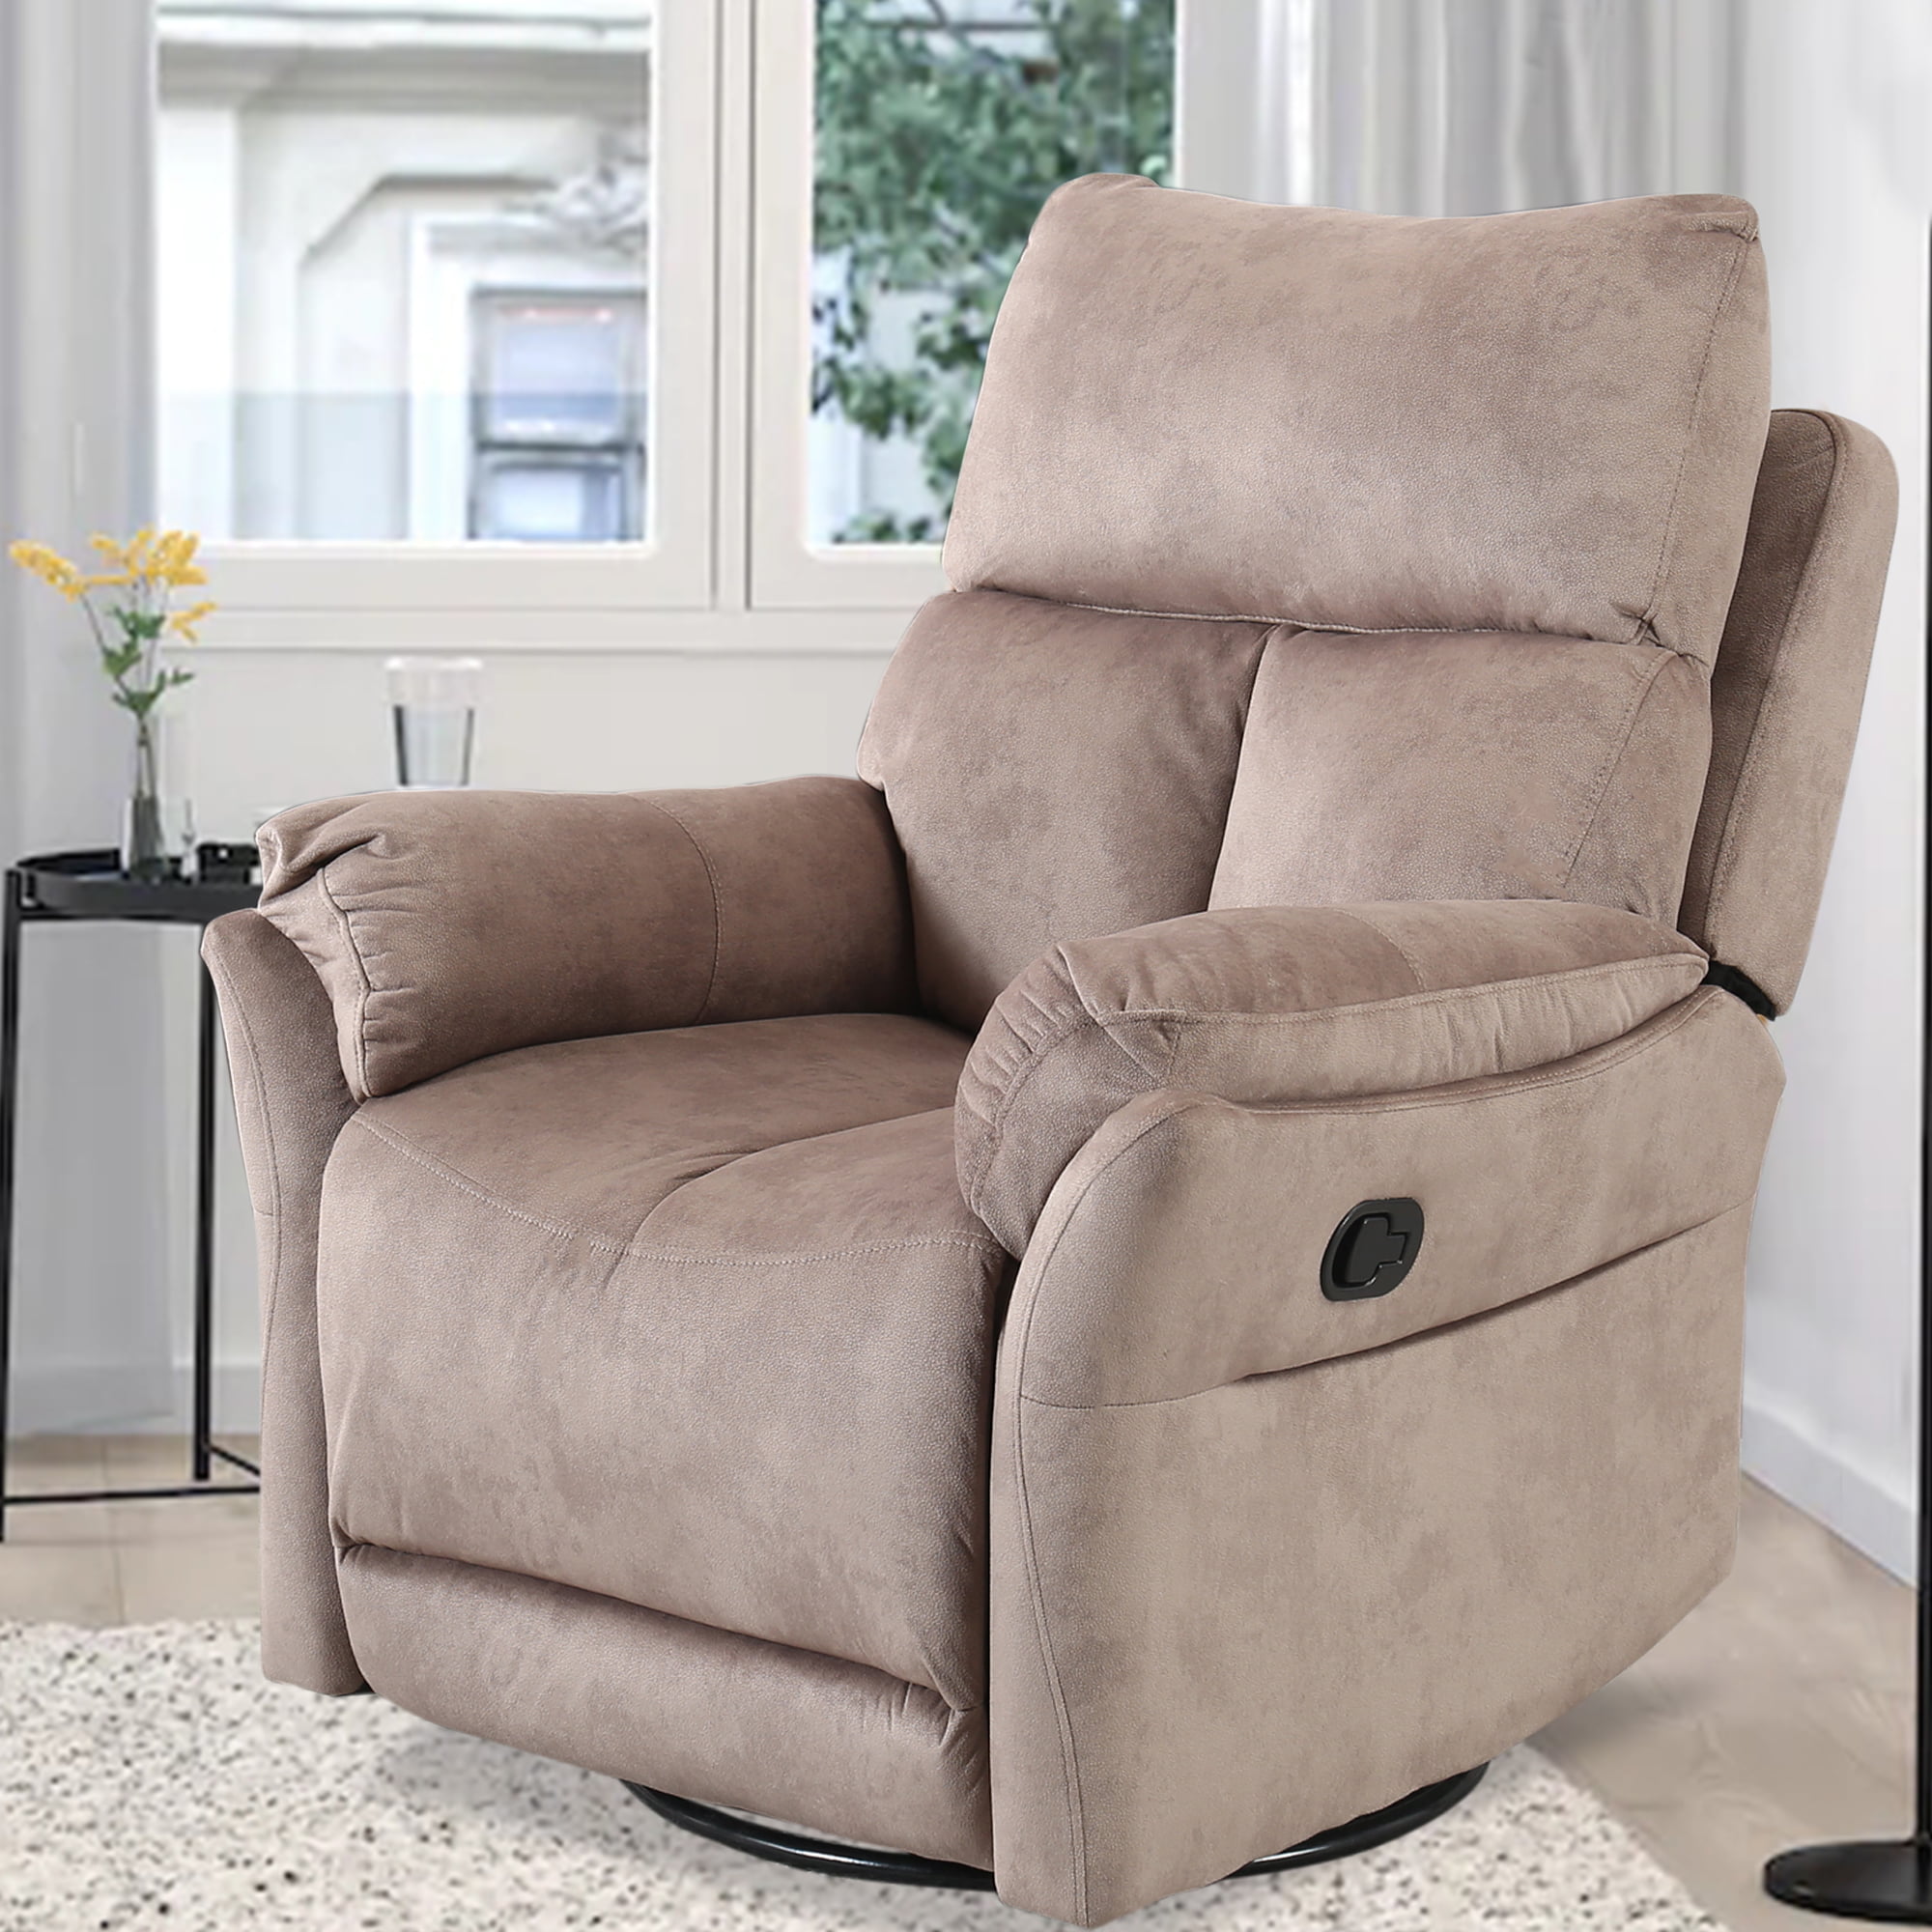 Details about   Beige Microfiber Arm Chair Recliners Manual Armchair Lazy Chairs Tan Recliner 